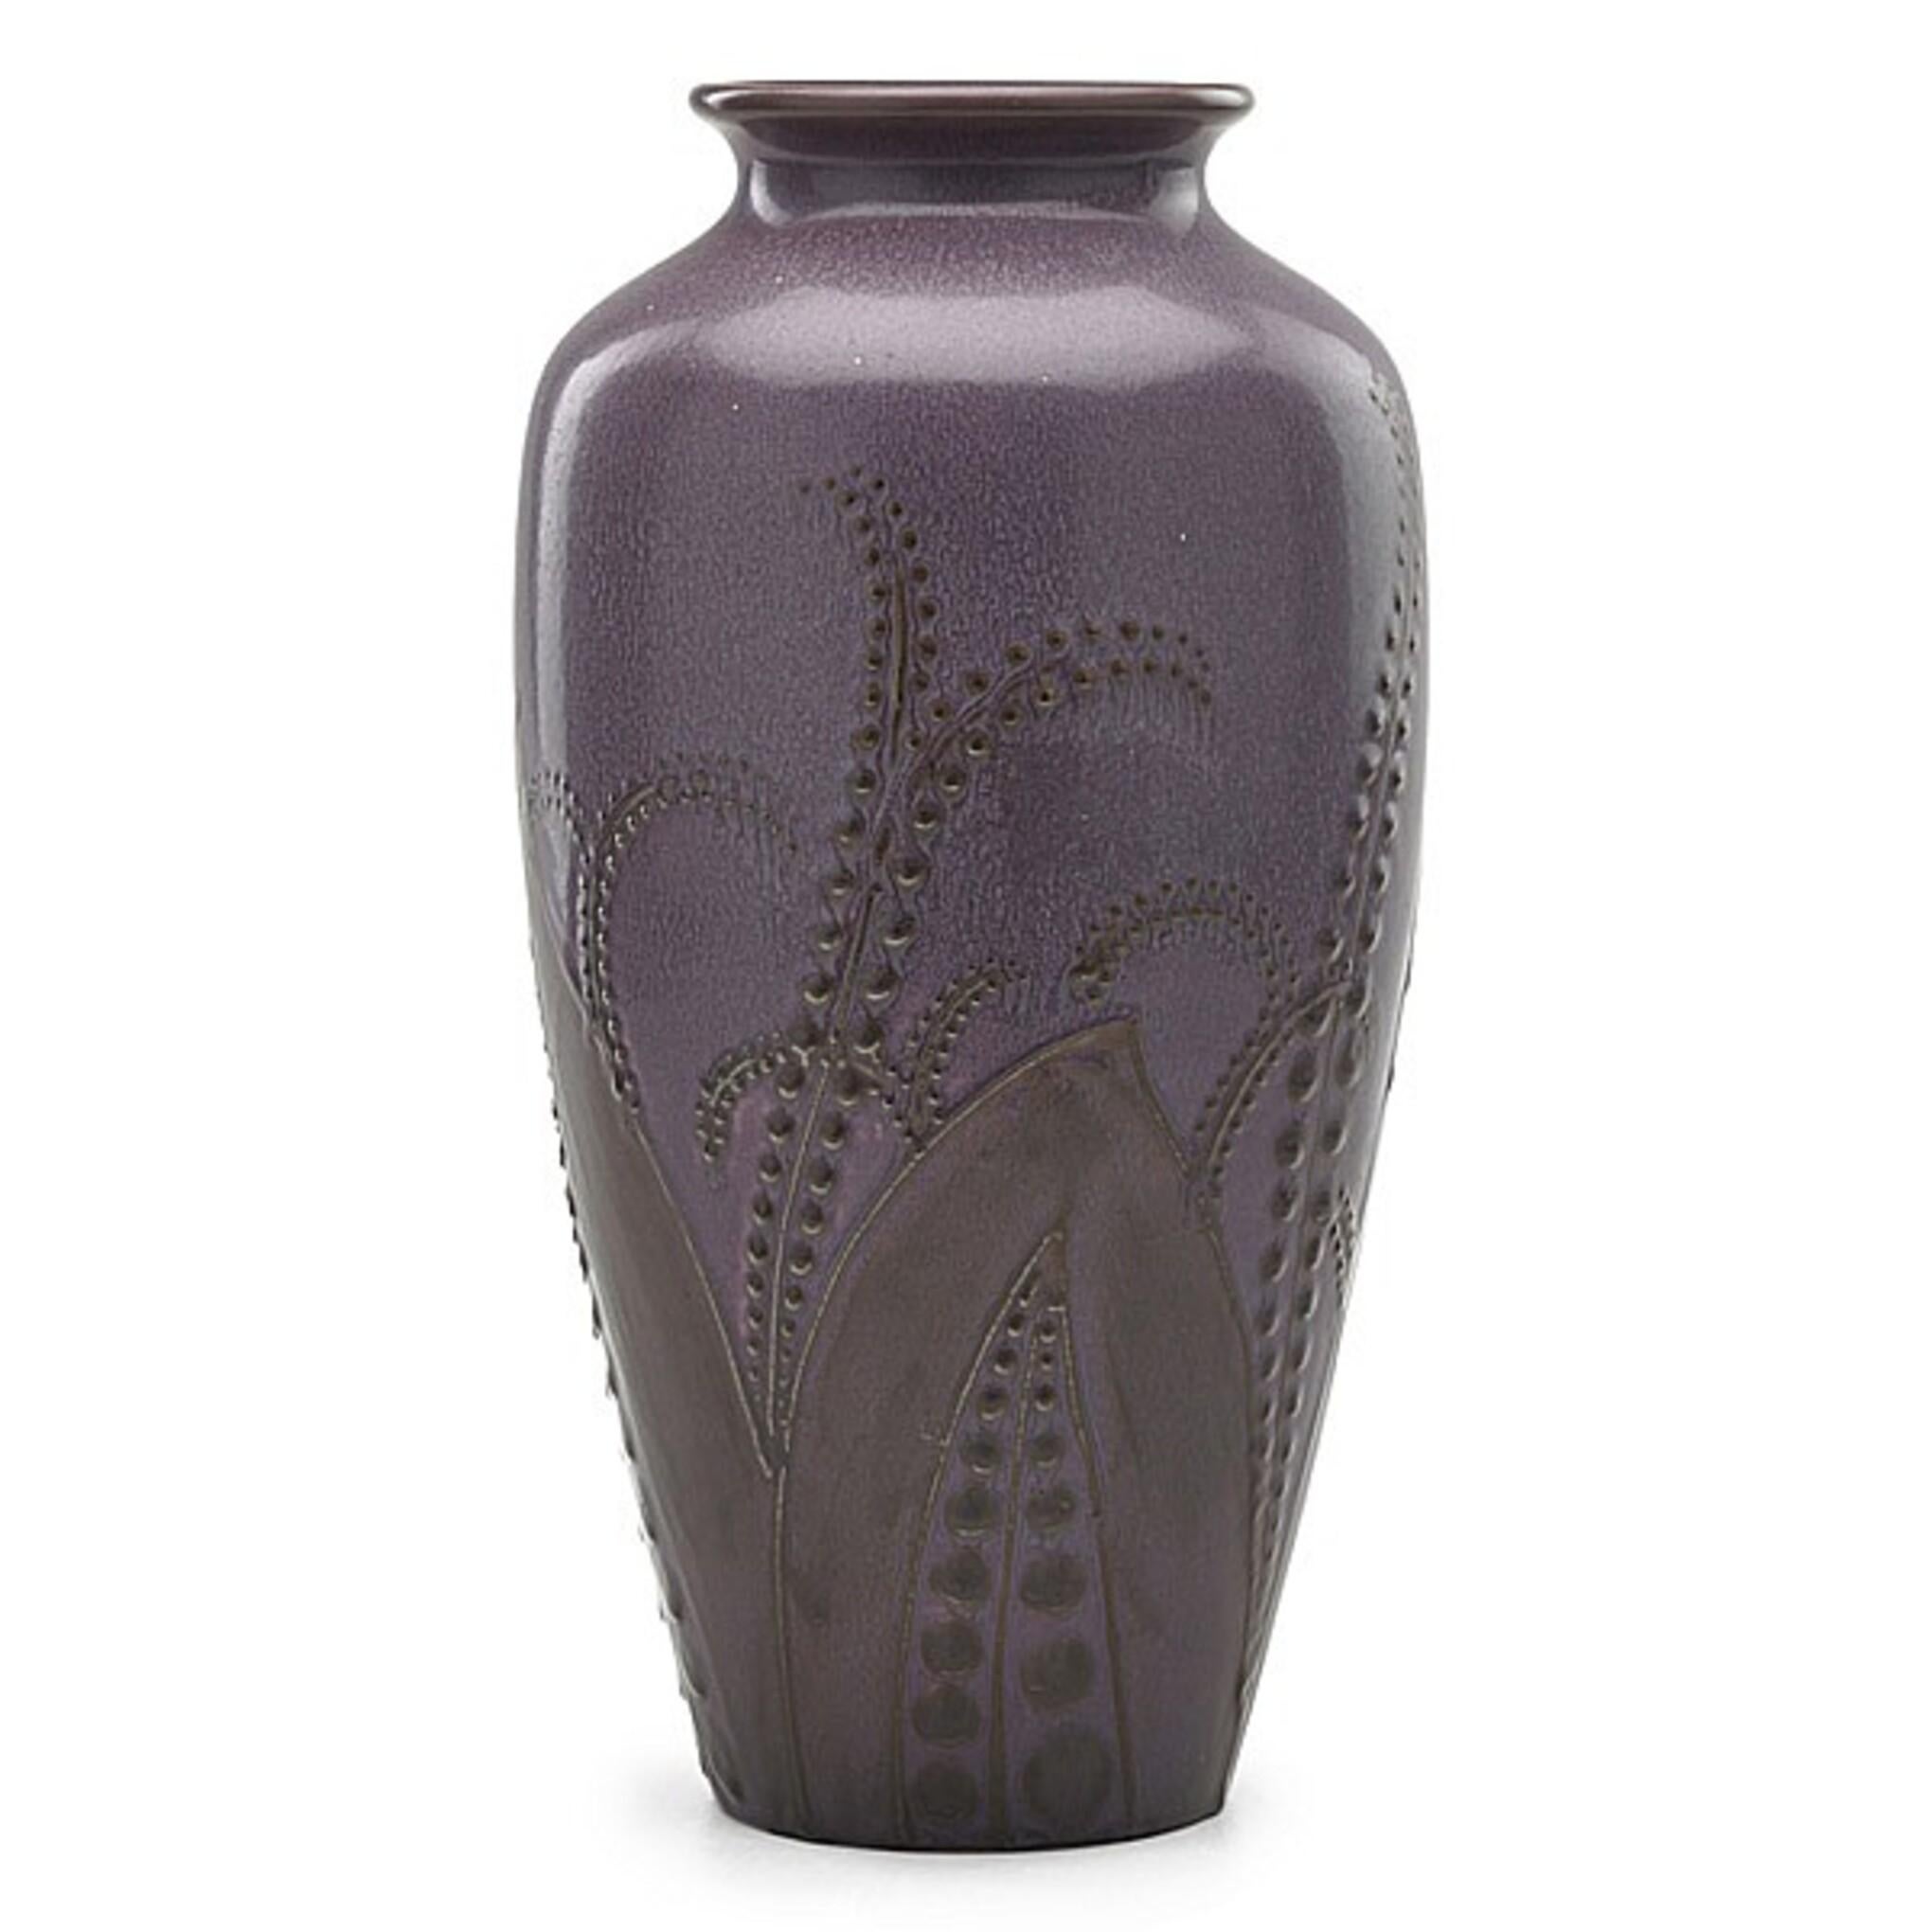 Glazed Art Deco Unique Vase with relief foliage deco 1927 by Hentschel for Rookwood 